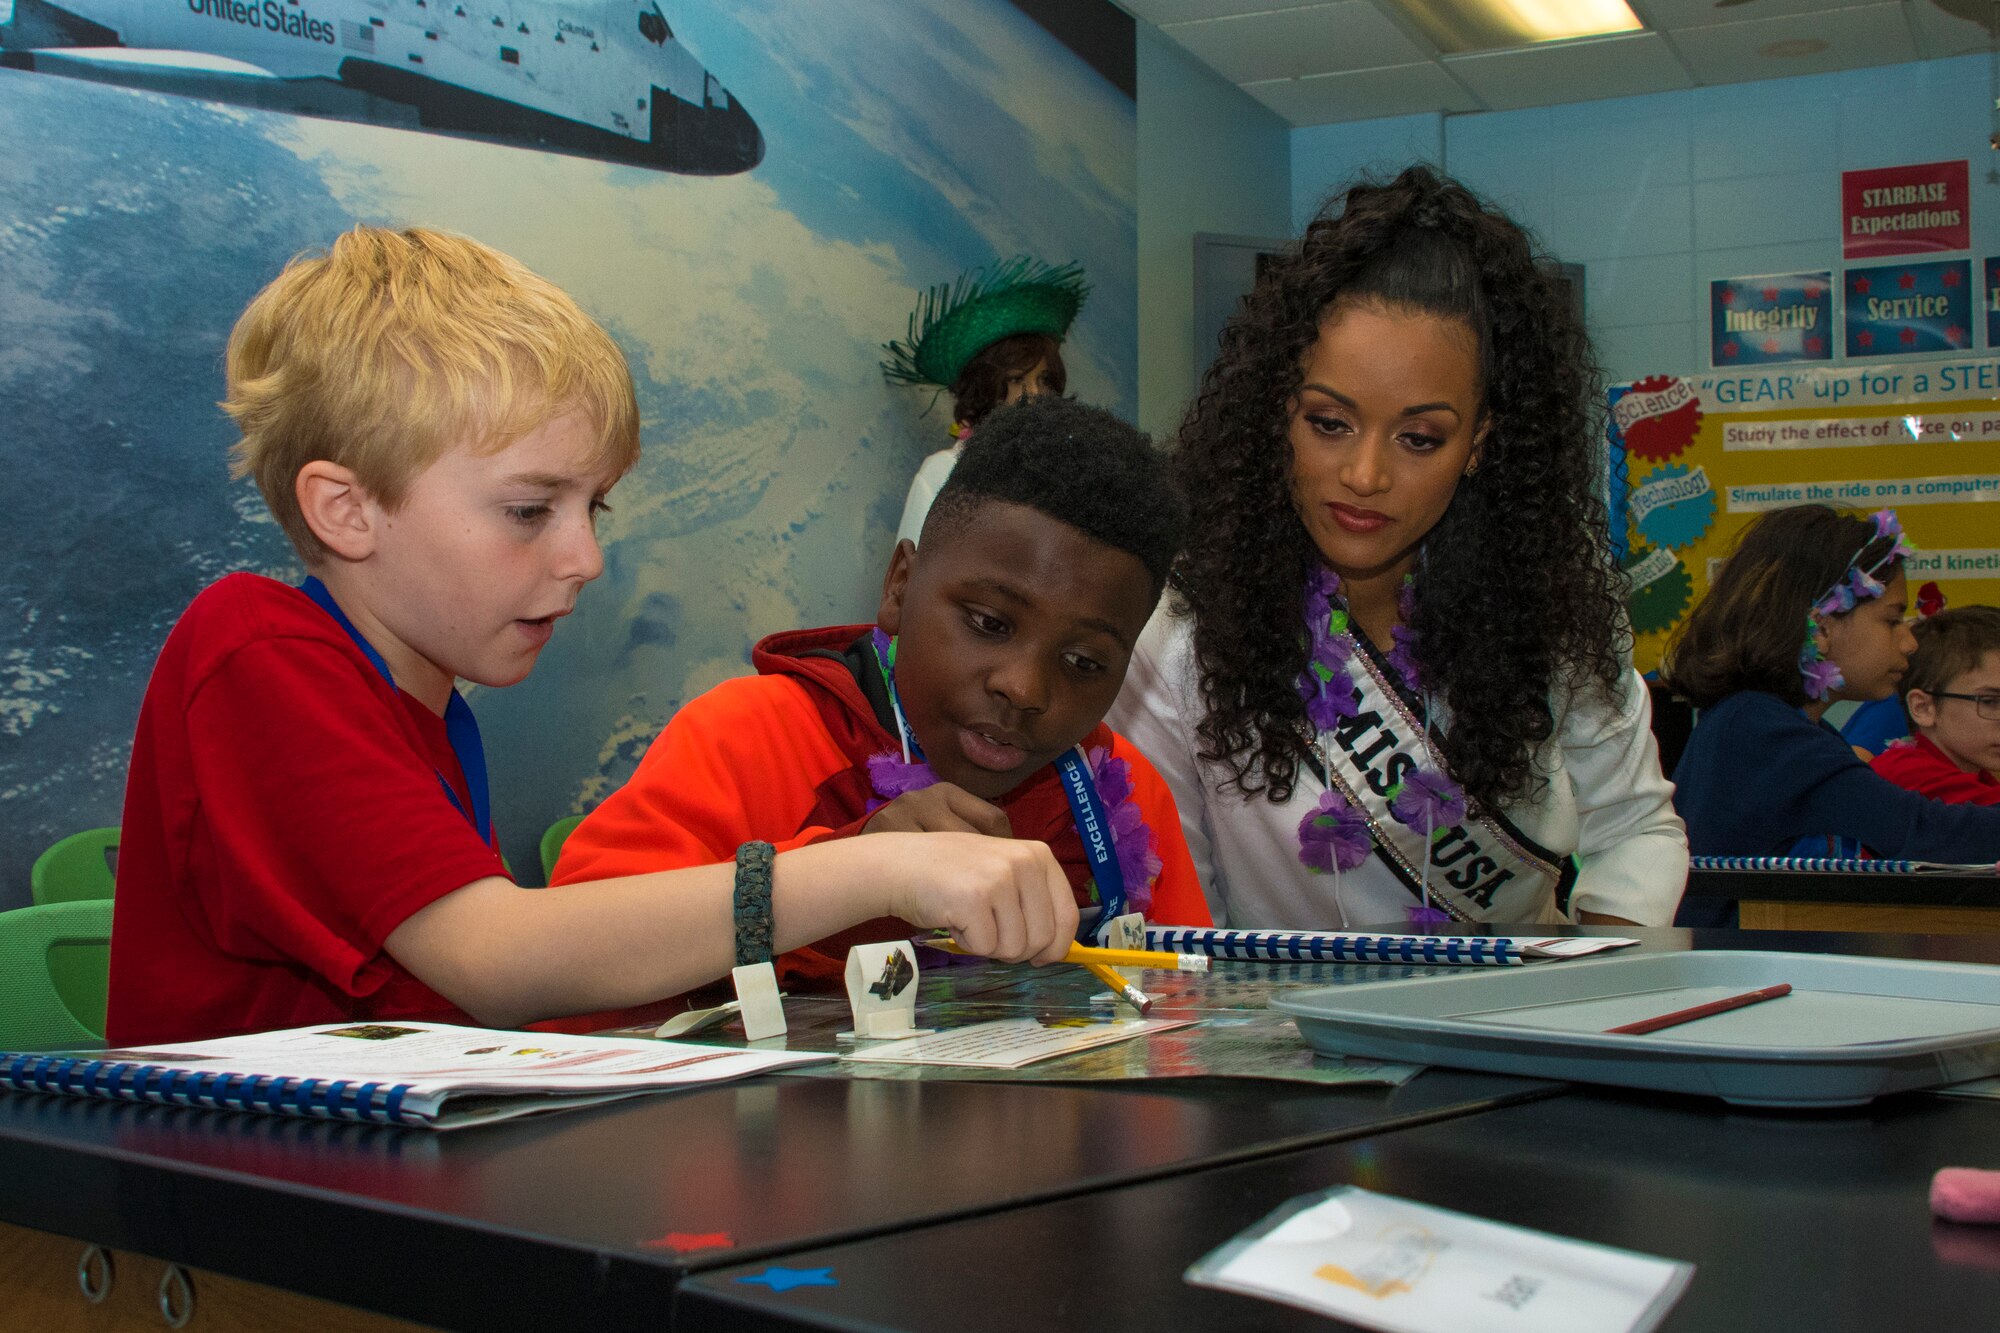 Kara McCullough, Miss USA 2017, helps students with their project during her visit to STARBASE Louisiana on Barksdale Air Force Base, Louisiana, May 15, 2018.